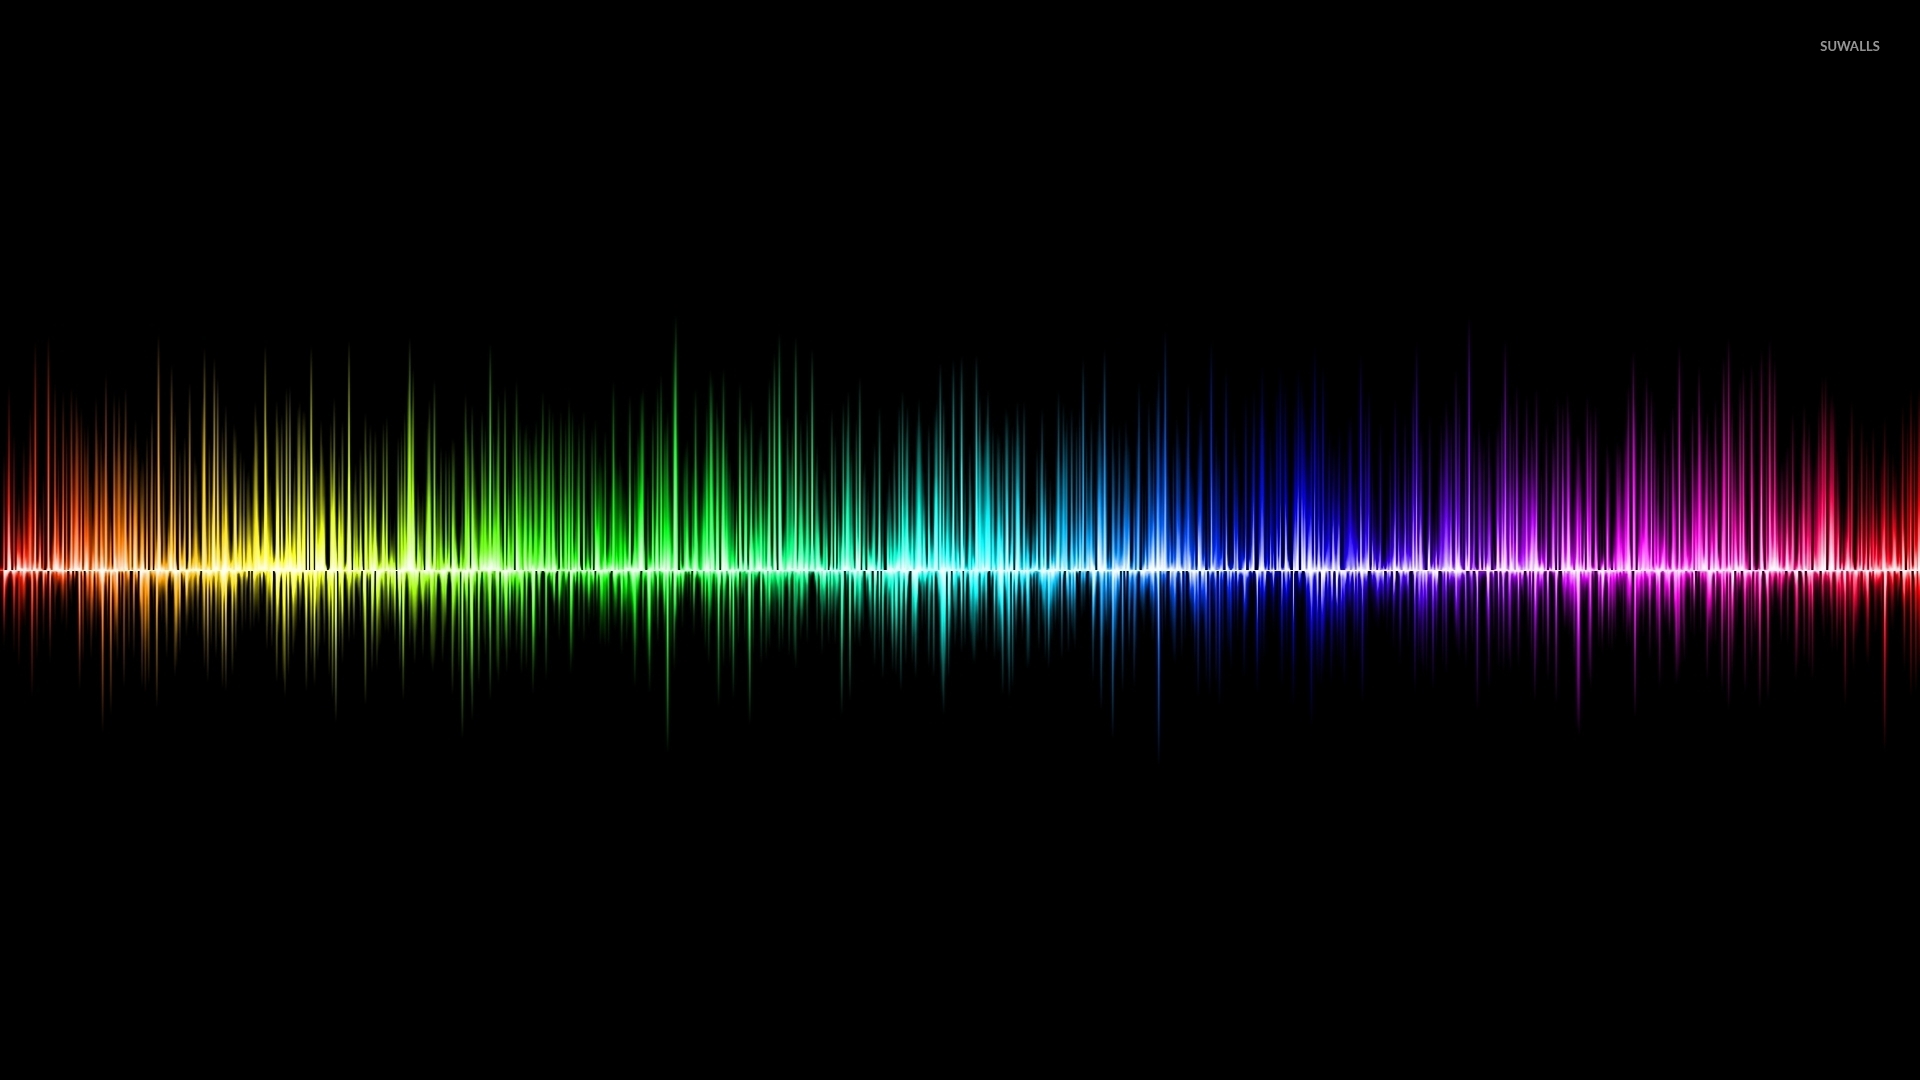 Sound waves wallpaper   Abstract wallpapers   34031